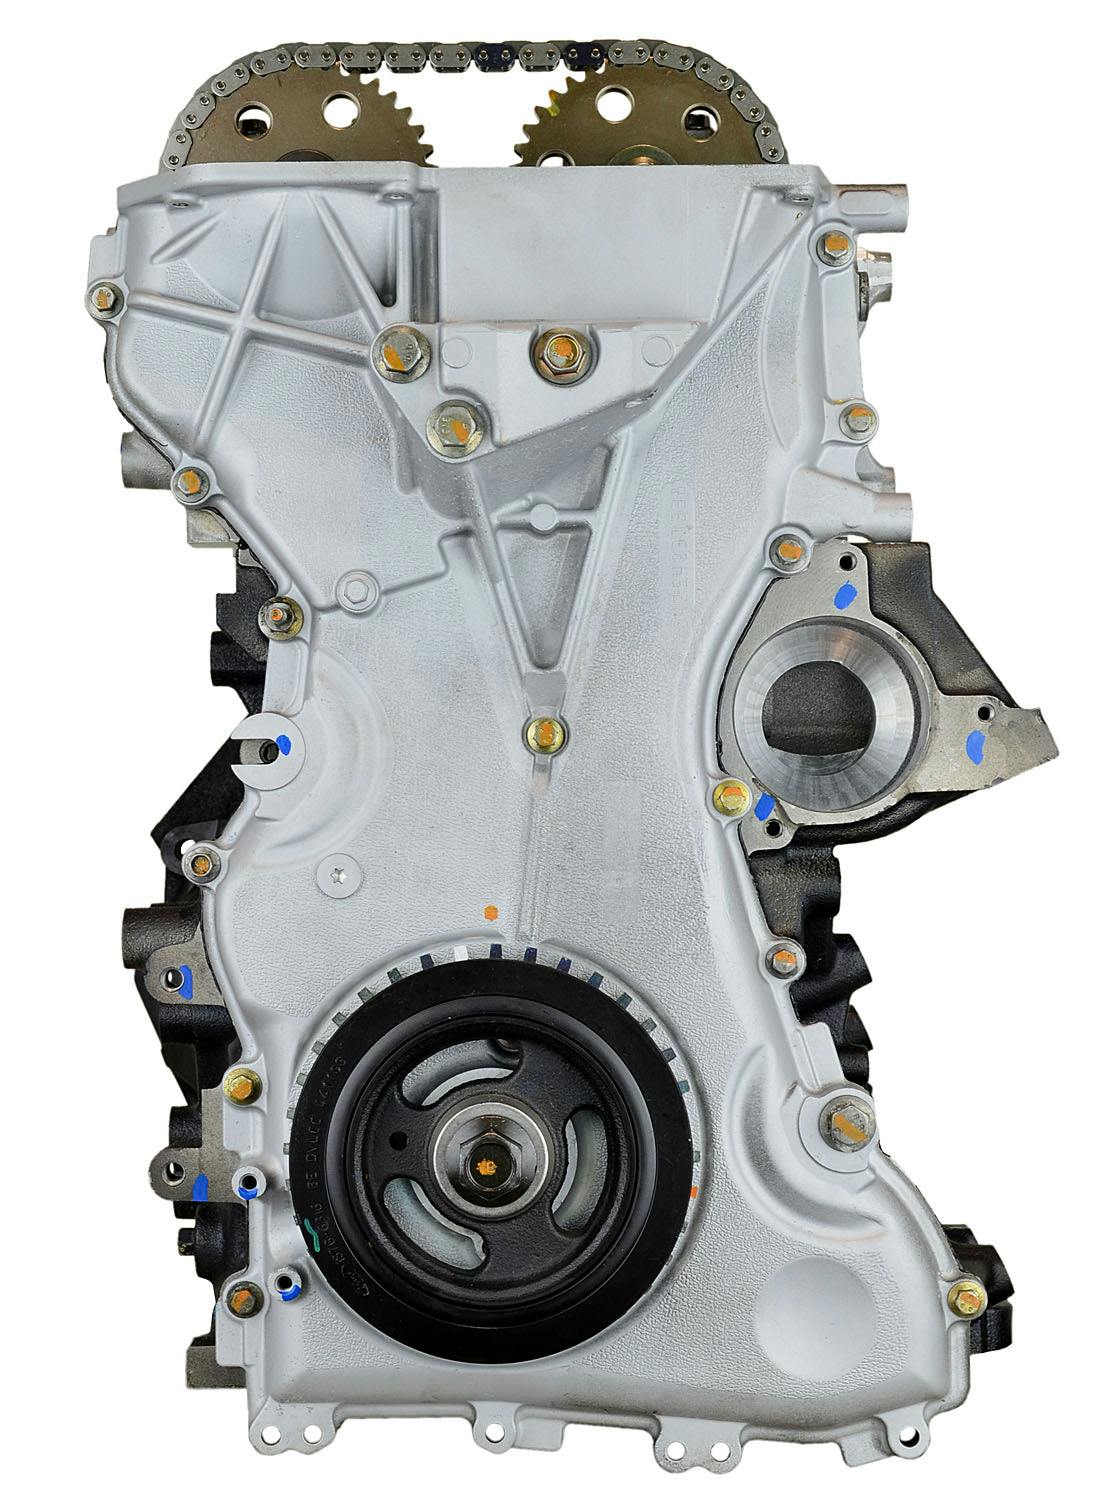 2L Inline-4 Engine for 2005-2008 Ford Focus